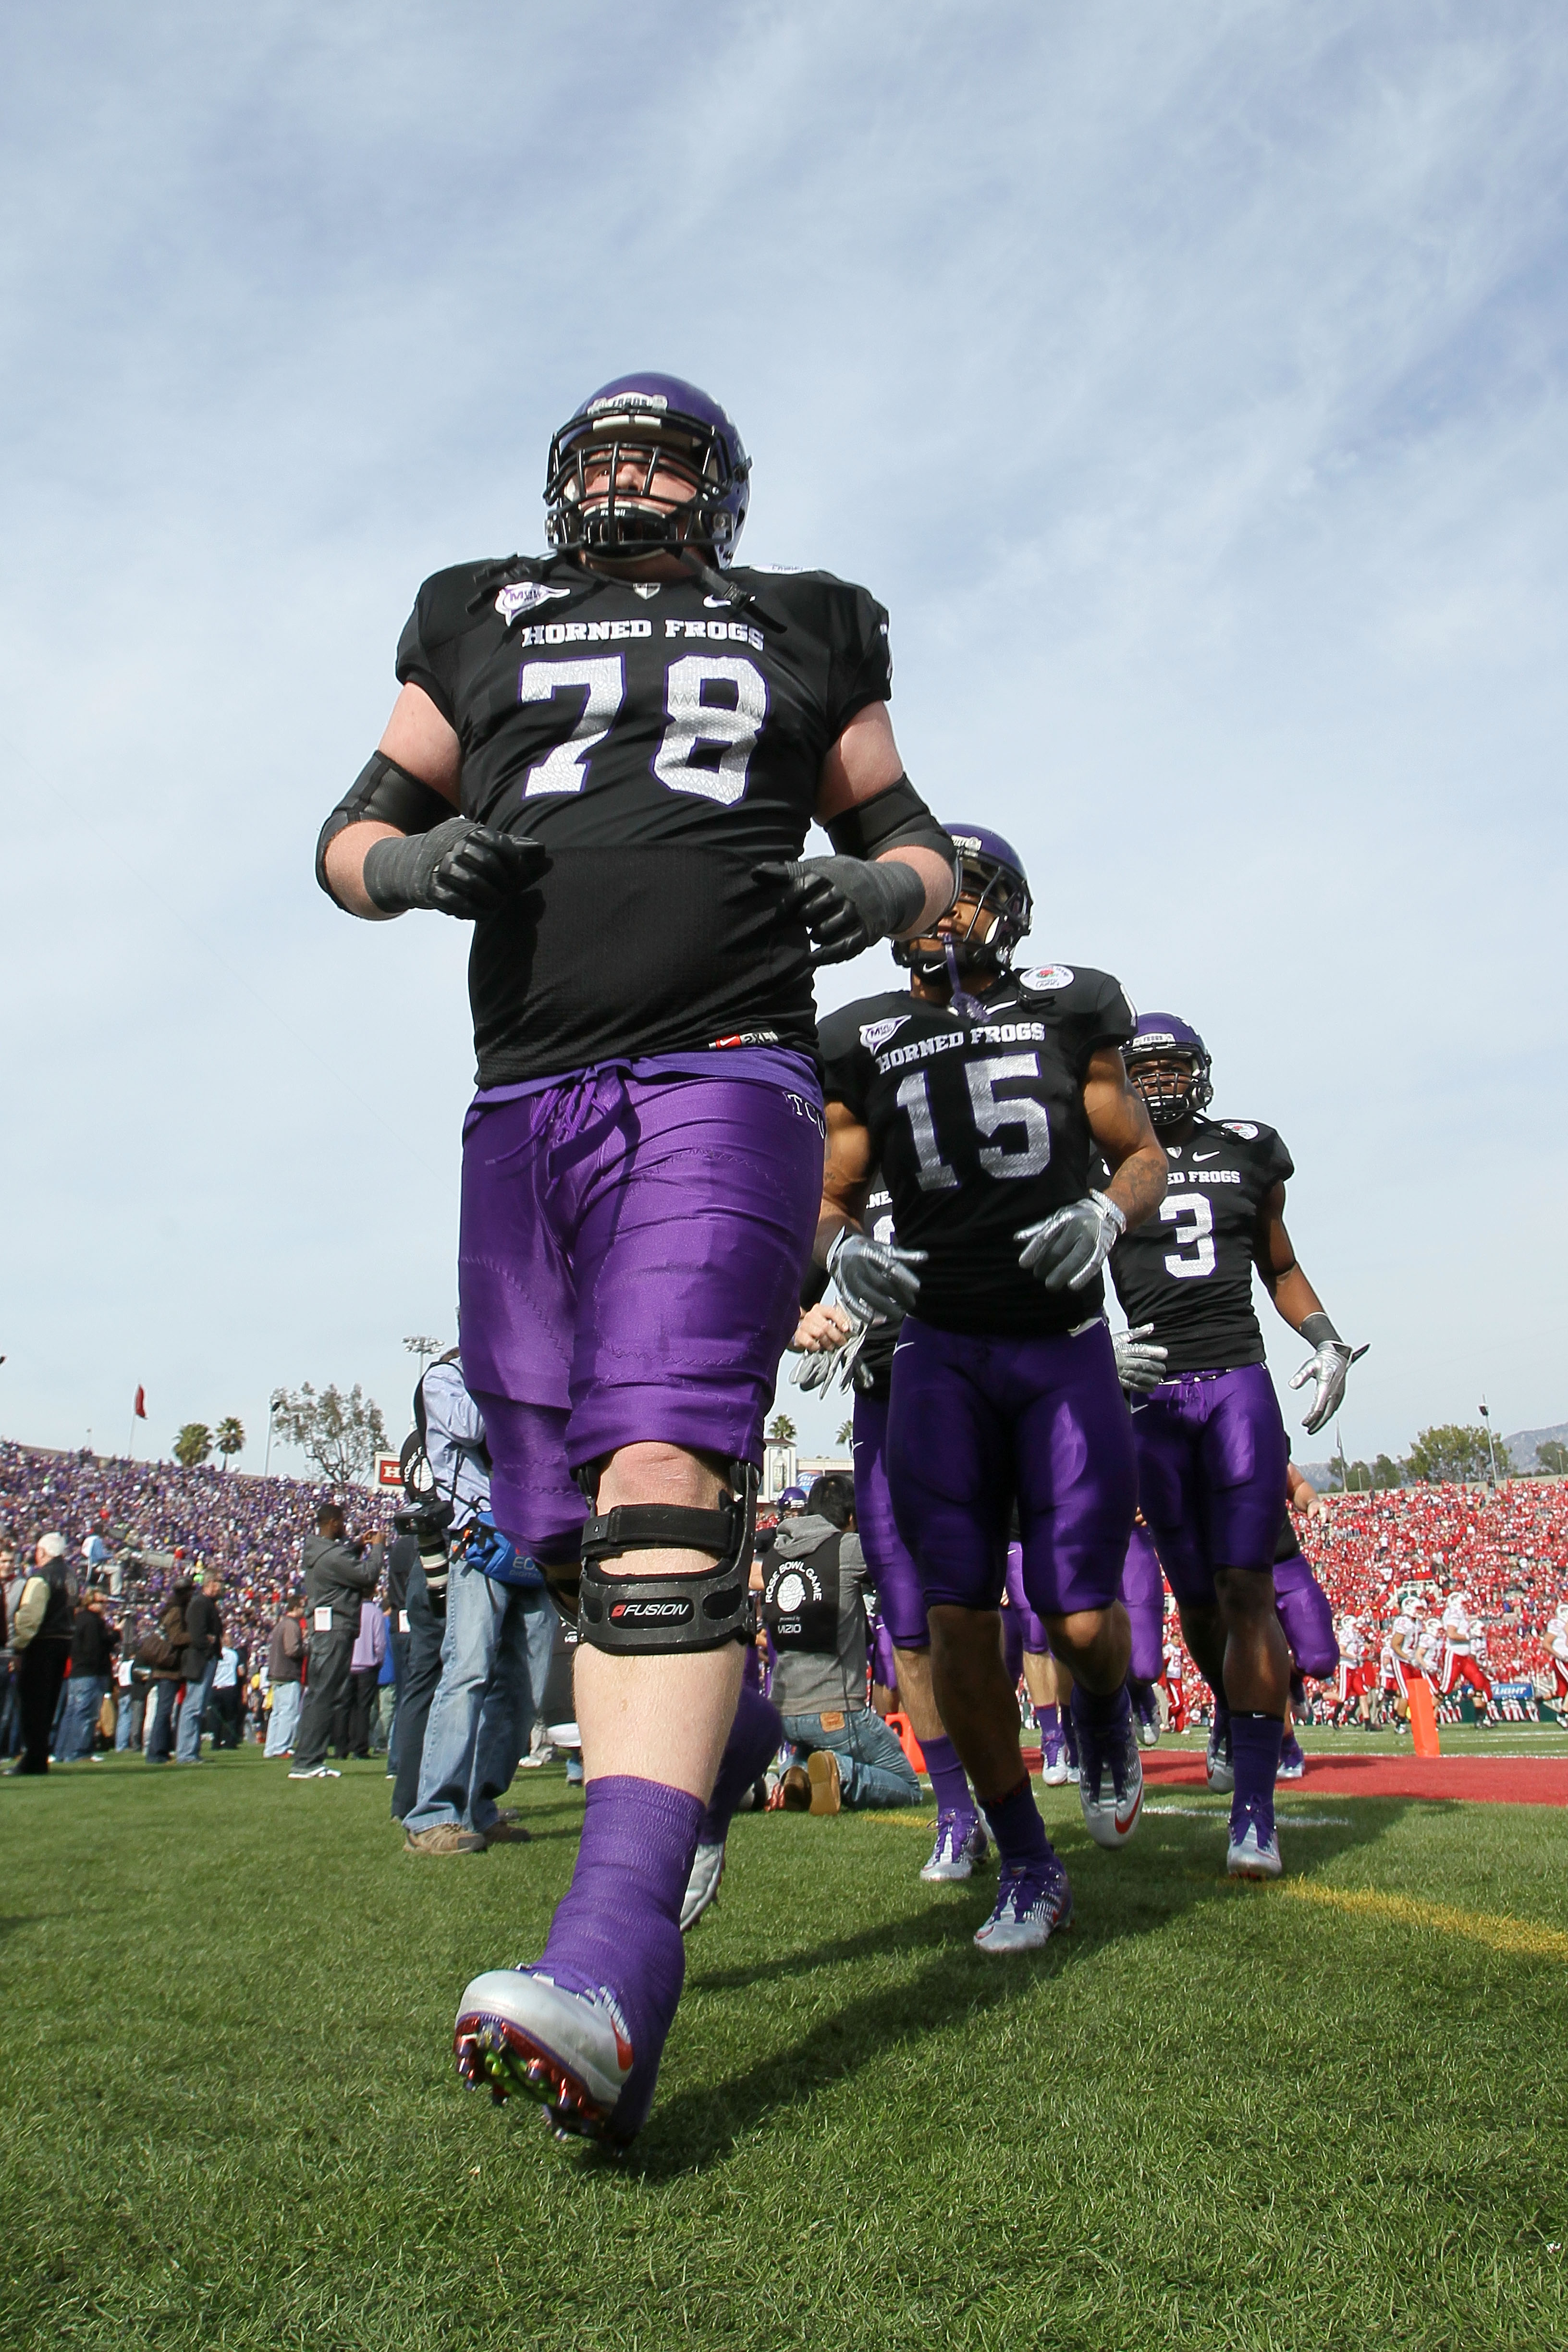 PASADENA, CA - JANUARY 01:  Guard Josh Vernon #78 of the TCU Horned Frogs jogs off the field prior to playing the Wisconsin Badgers in the 97th Rose Bowl game on January 1, 2011 in Pasadena, California.  (Photo by Stephen Dunn/Getty Images)